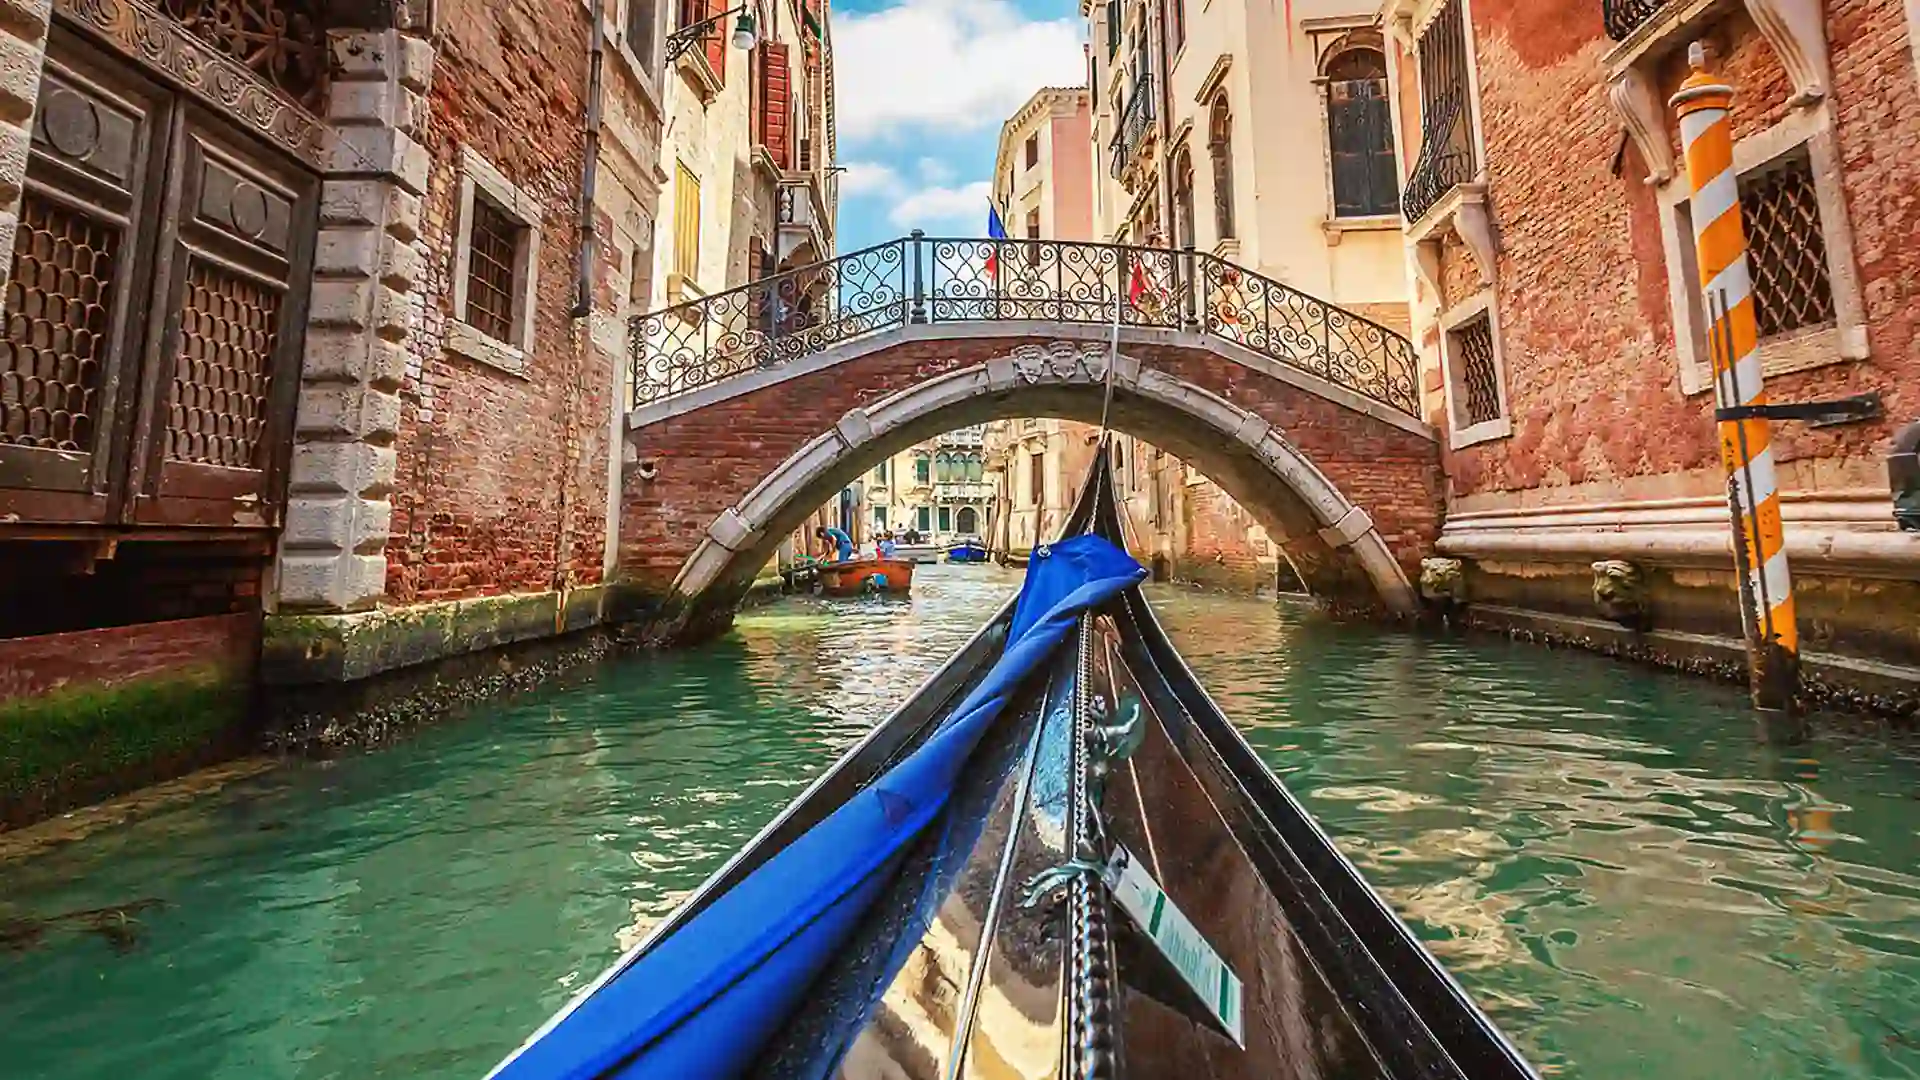 View from bow of gondola sailing toward bridge on narrow waterway surrounded by buildings.